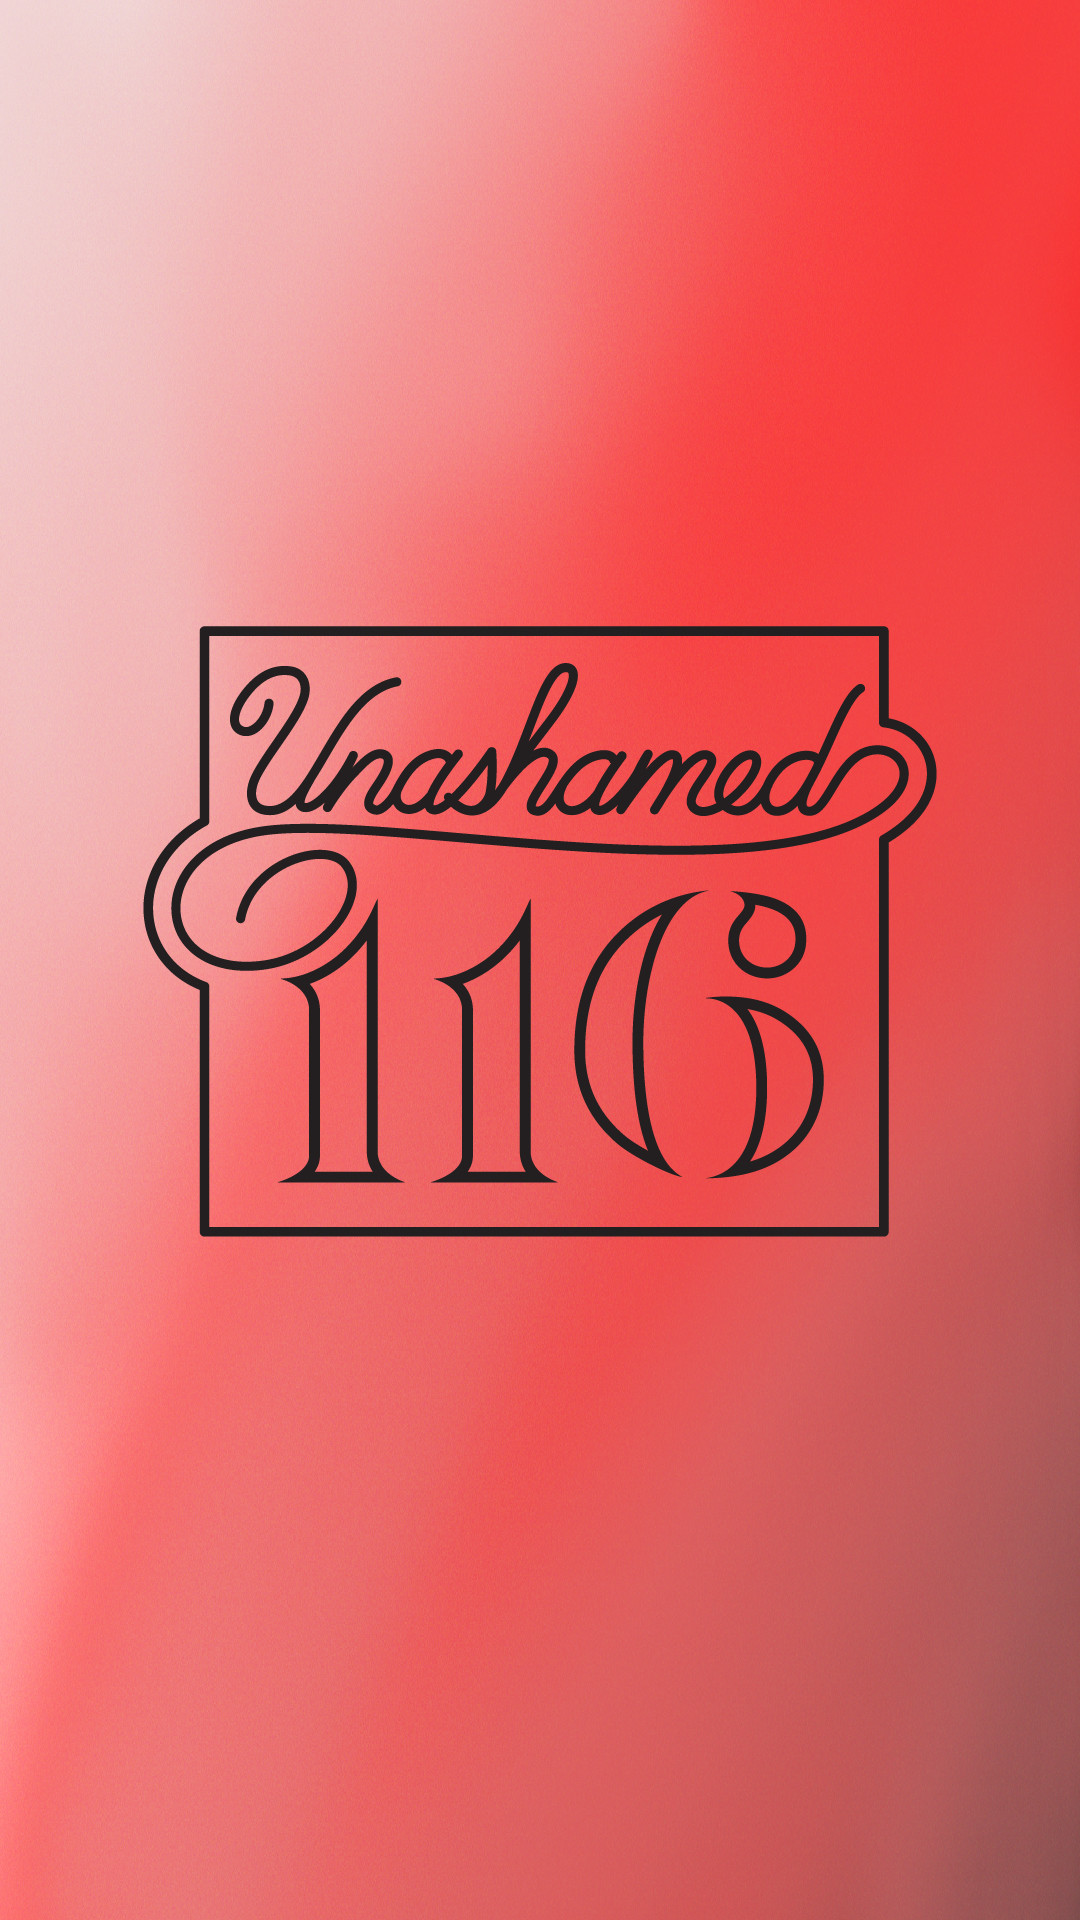 Reach Records - Unashamed 116 Iphone , HD Wallpaper & Backgrounds